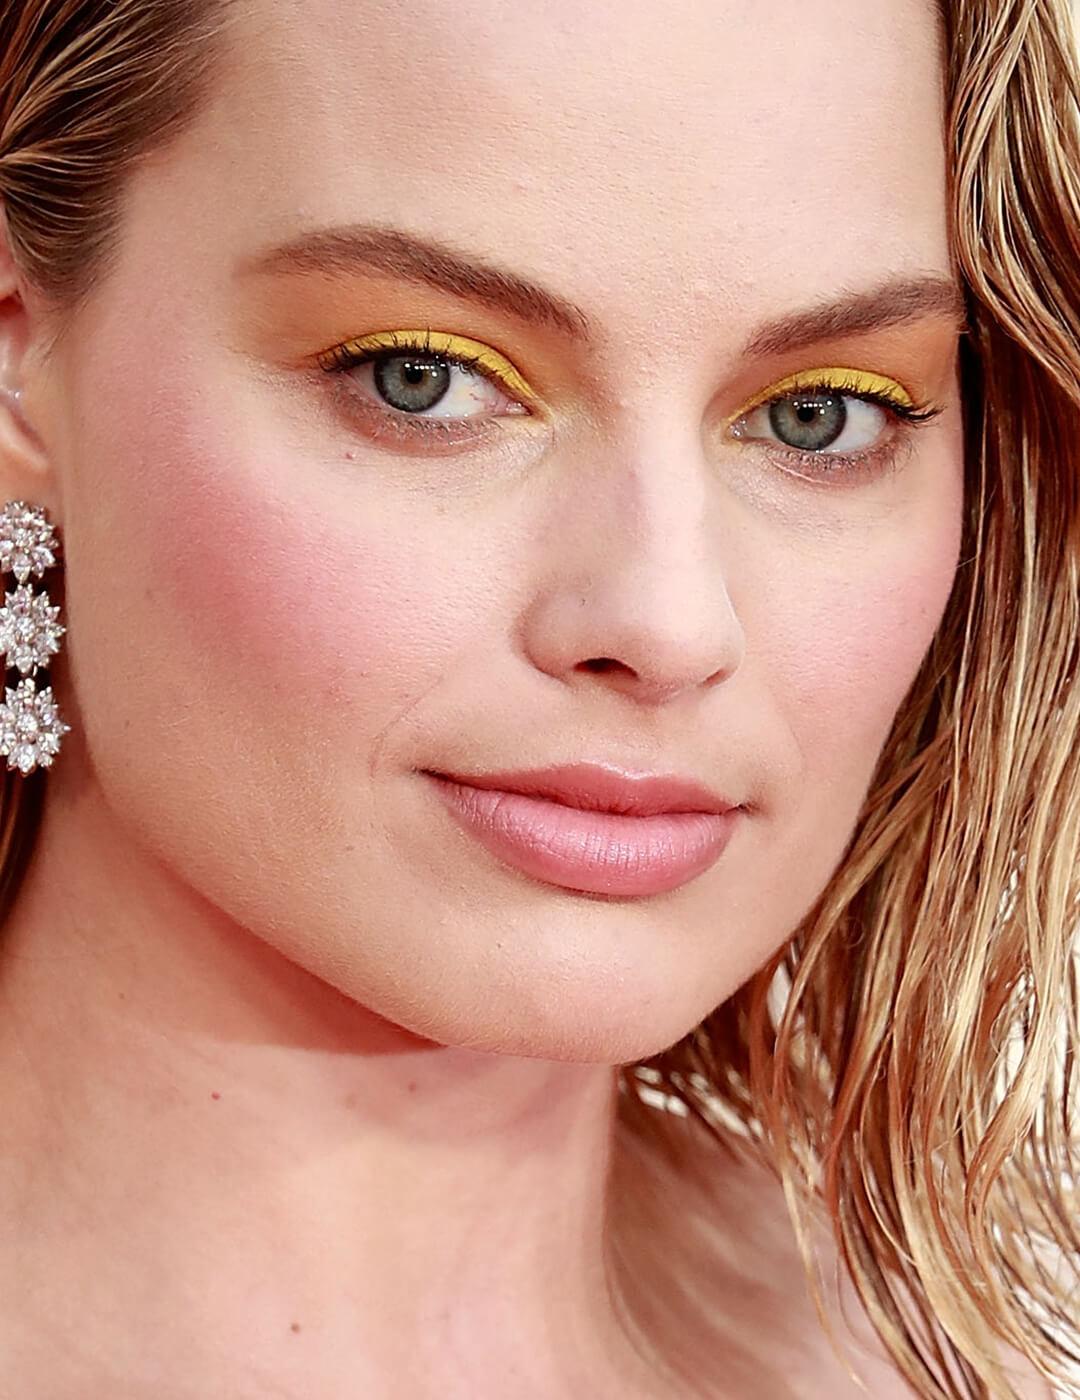 Margot Robbie rocking a yellow eyeshadow look and nude pink lips